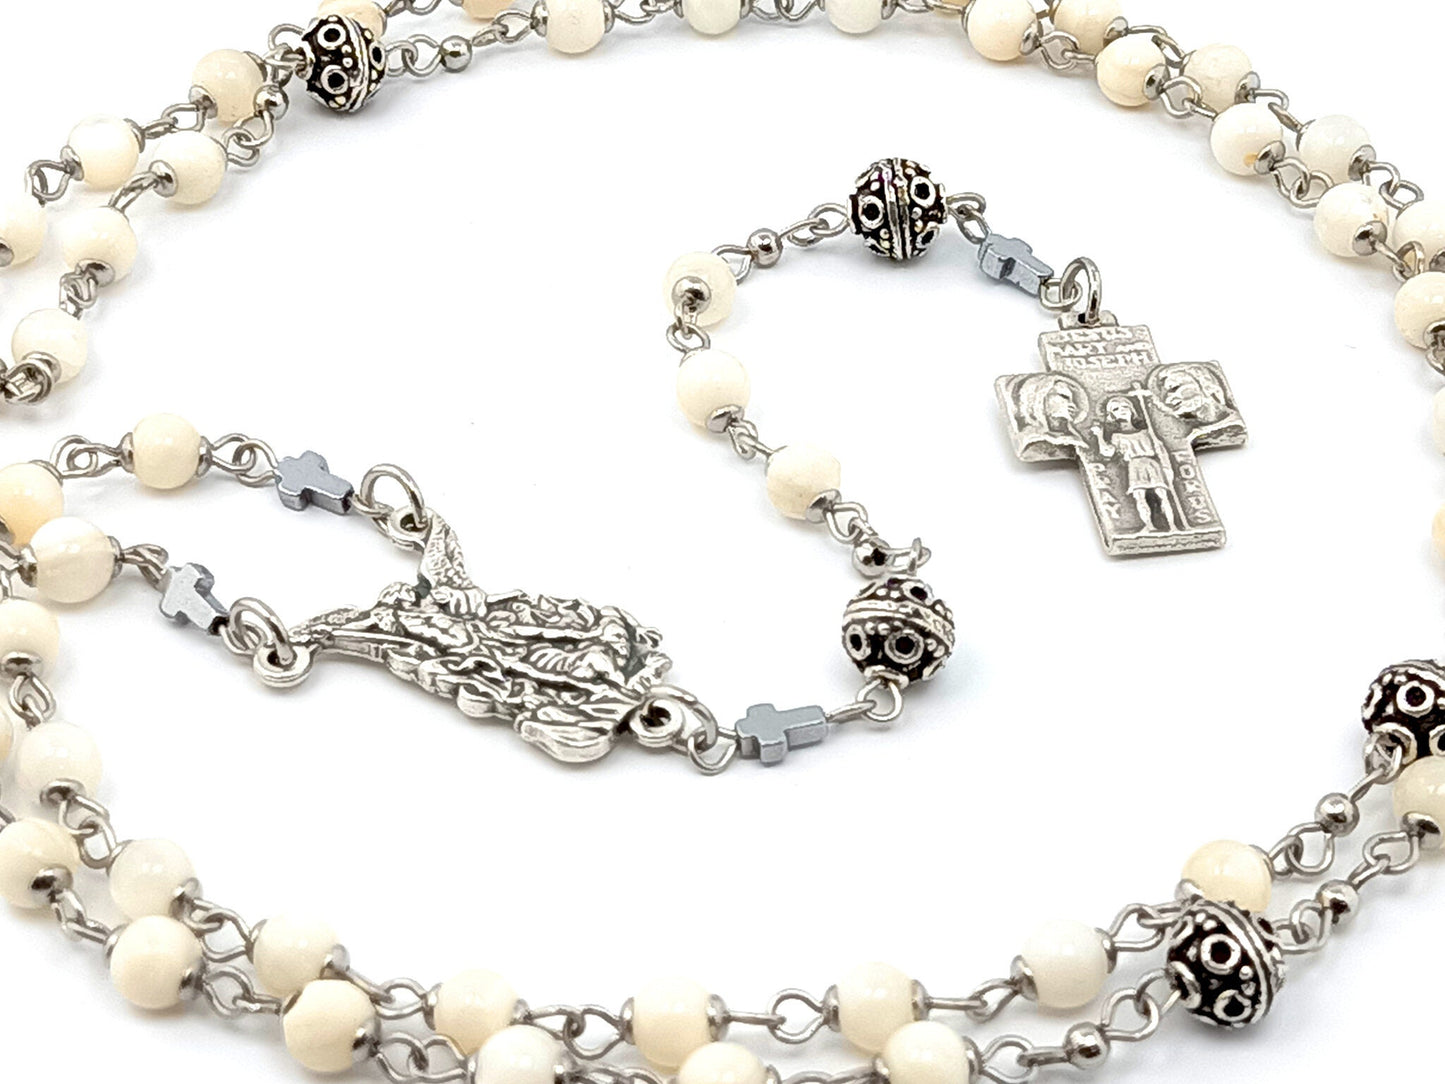 Saint Michael unique rosary beads mother of pearl rosary beads with Saint Christopher and the Holy Family silver cross.